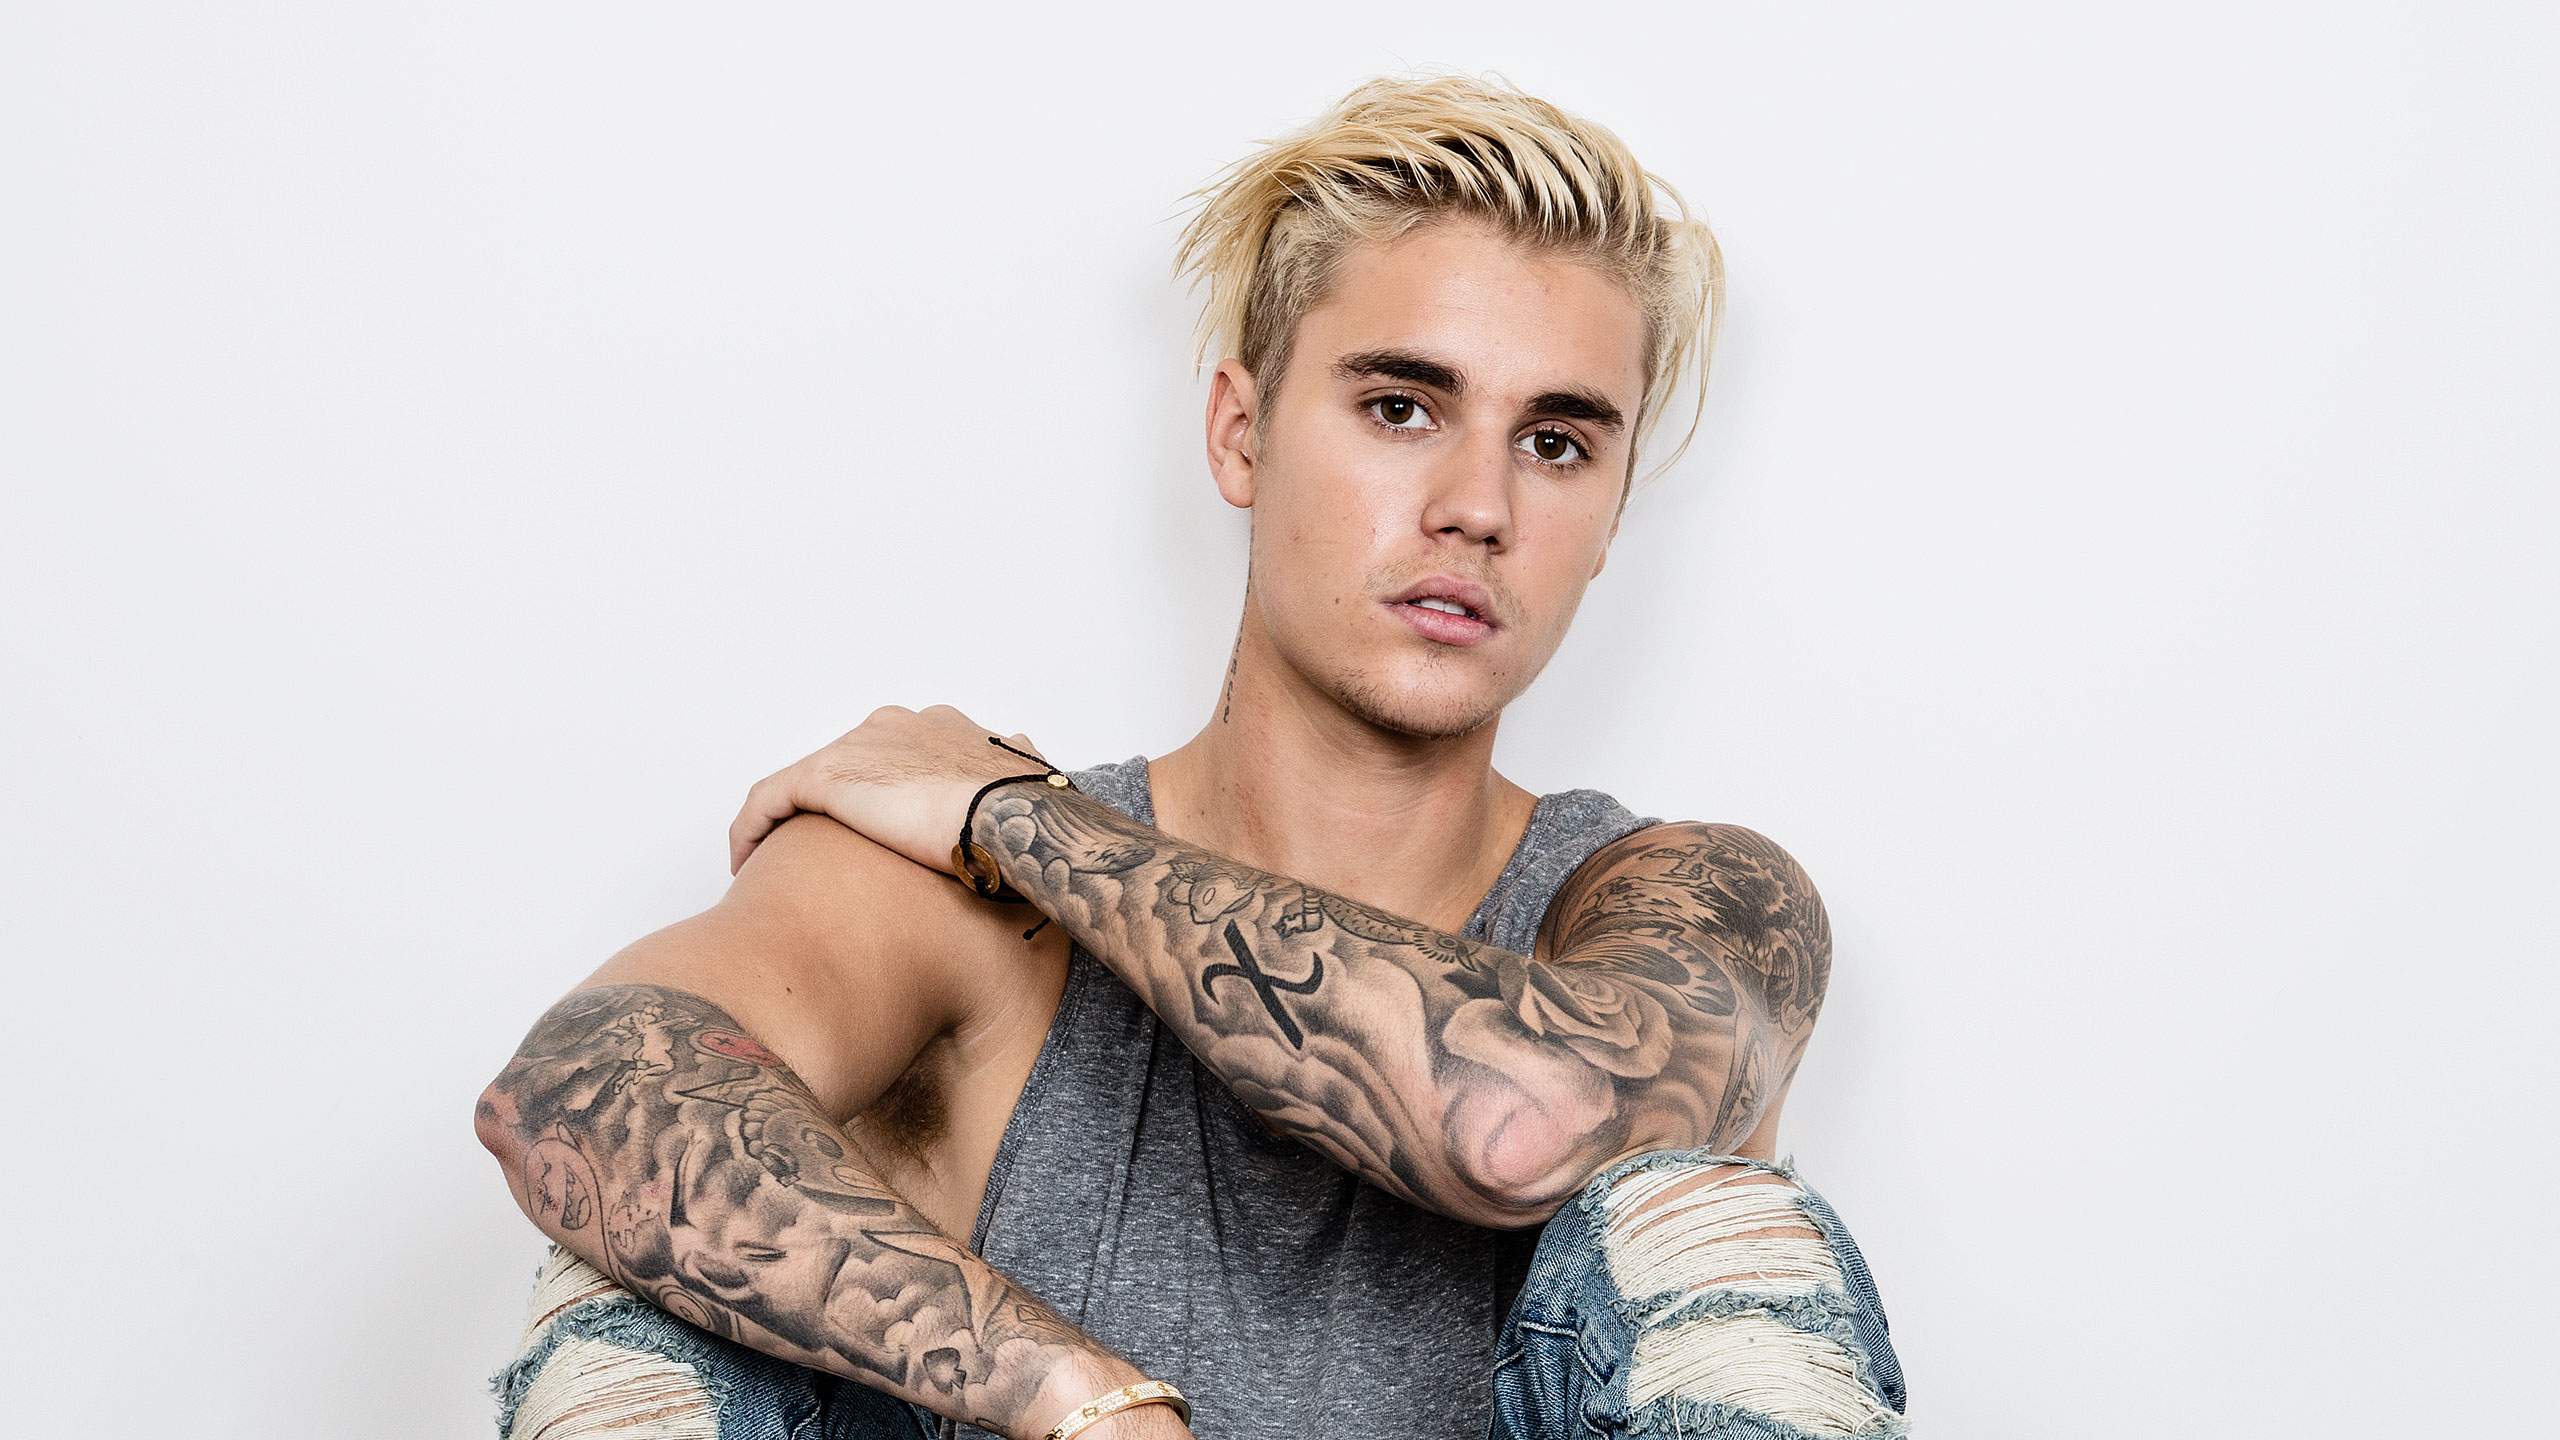 5 things to know about Justin Bieber's fashion label Drew House